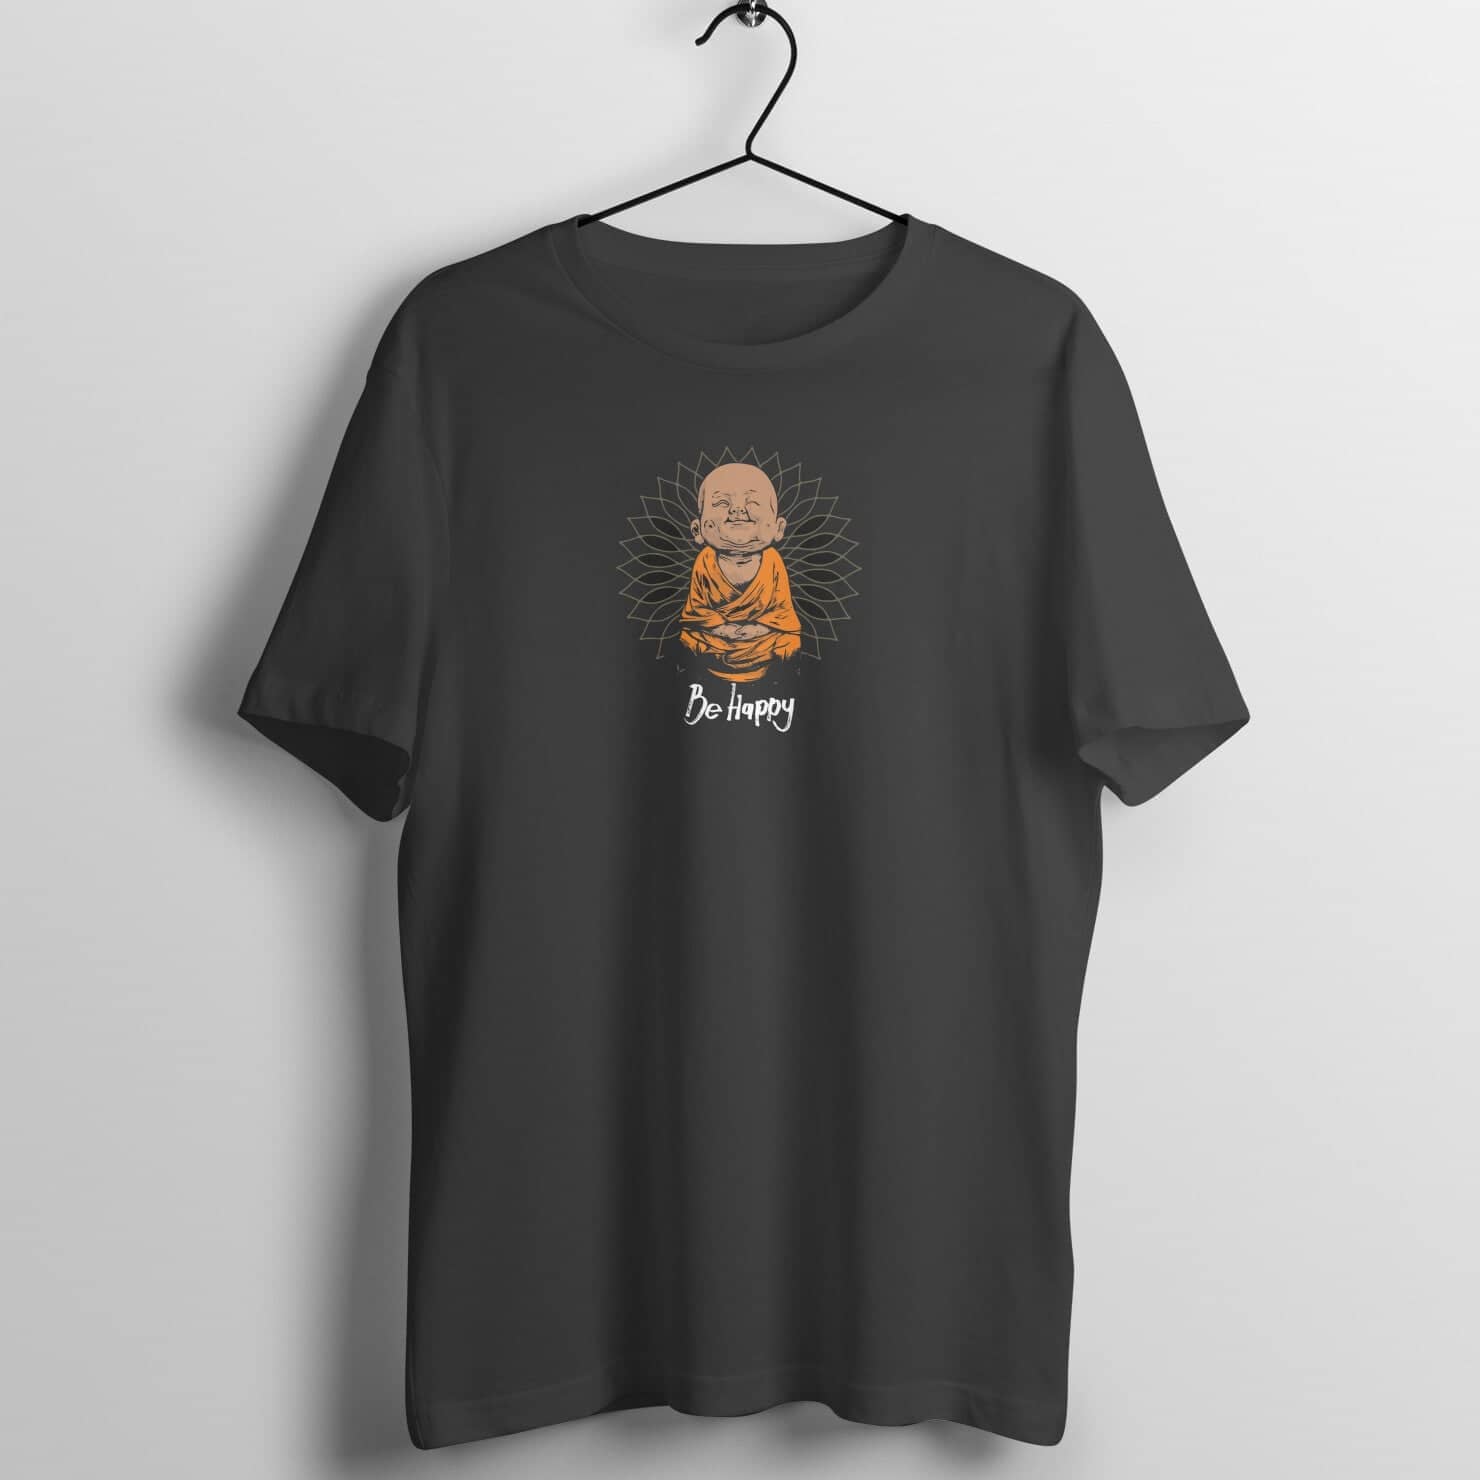 Be Happy Exclusive Smiling Buddha Black T Shirt for Men and Women Printrove Black S 